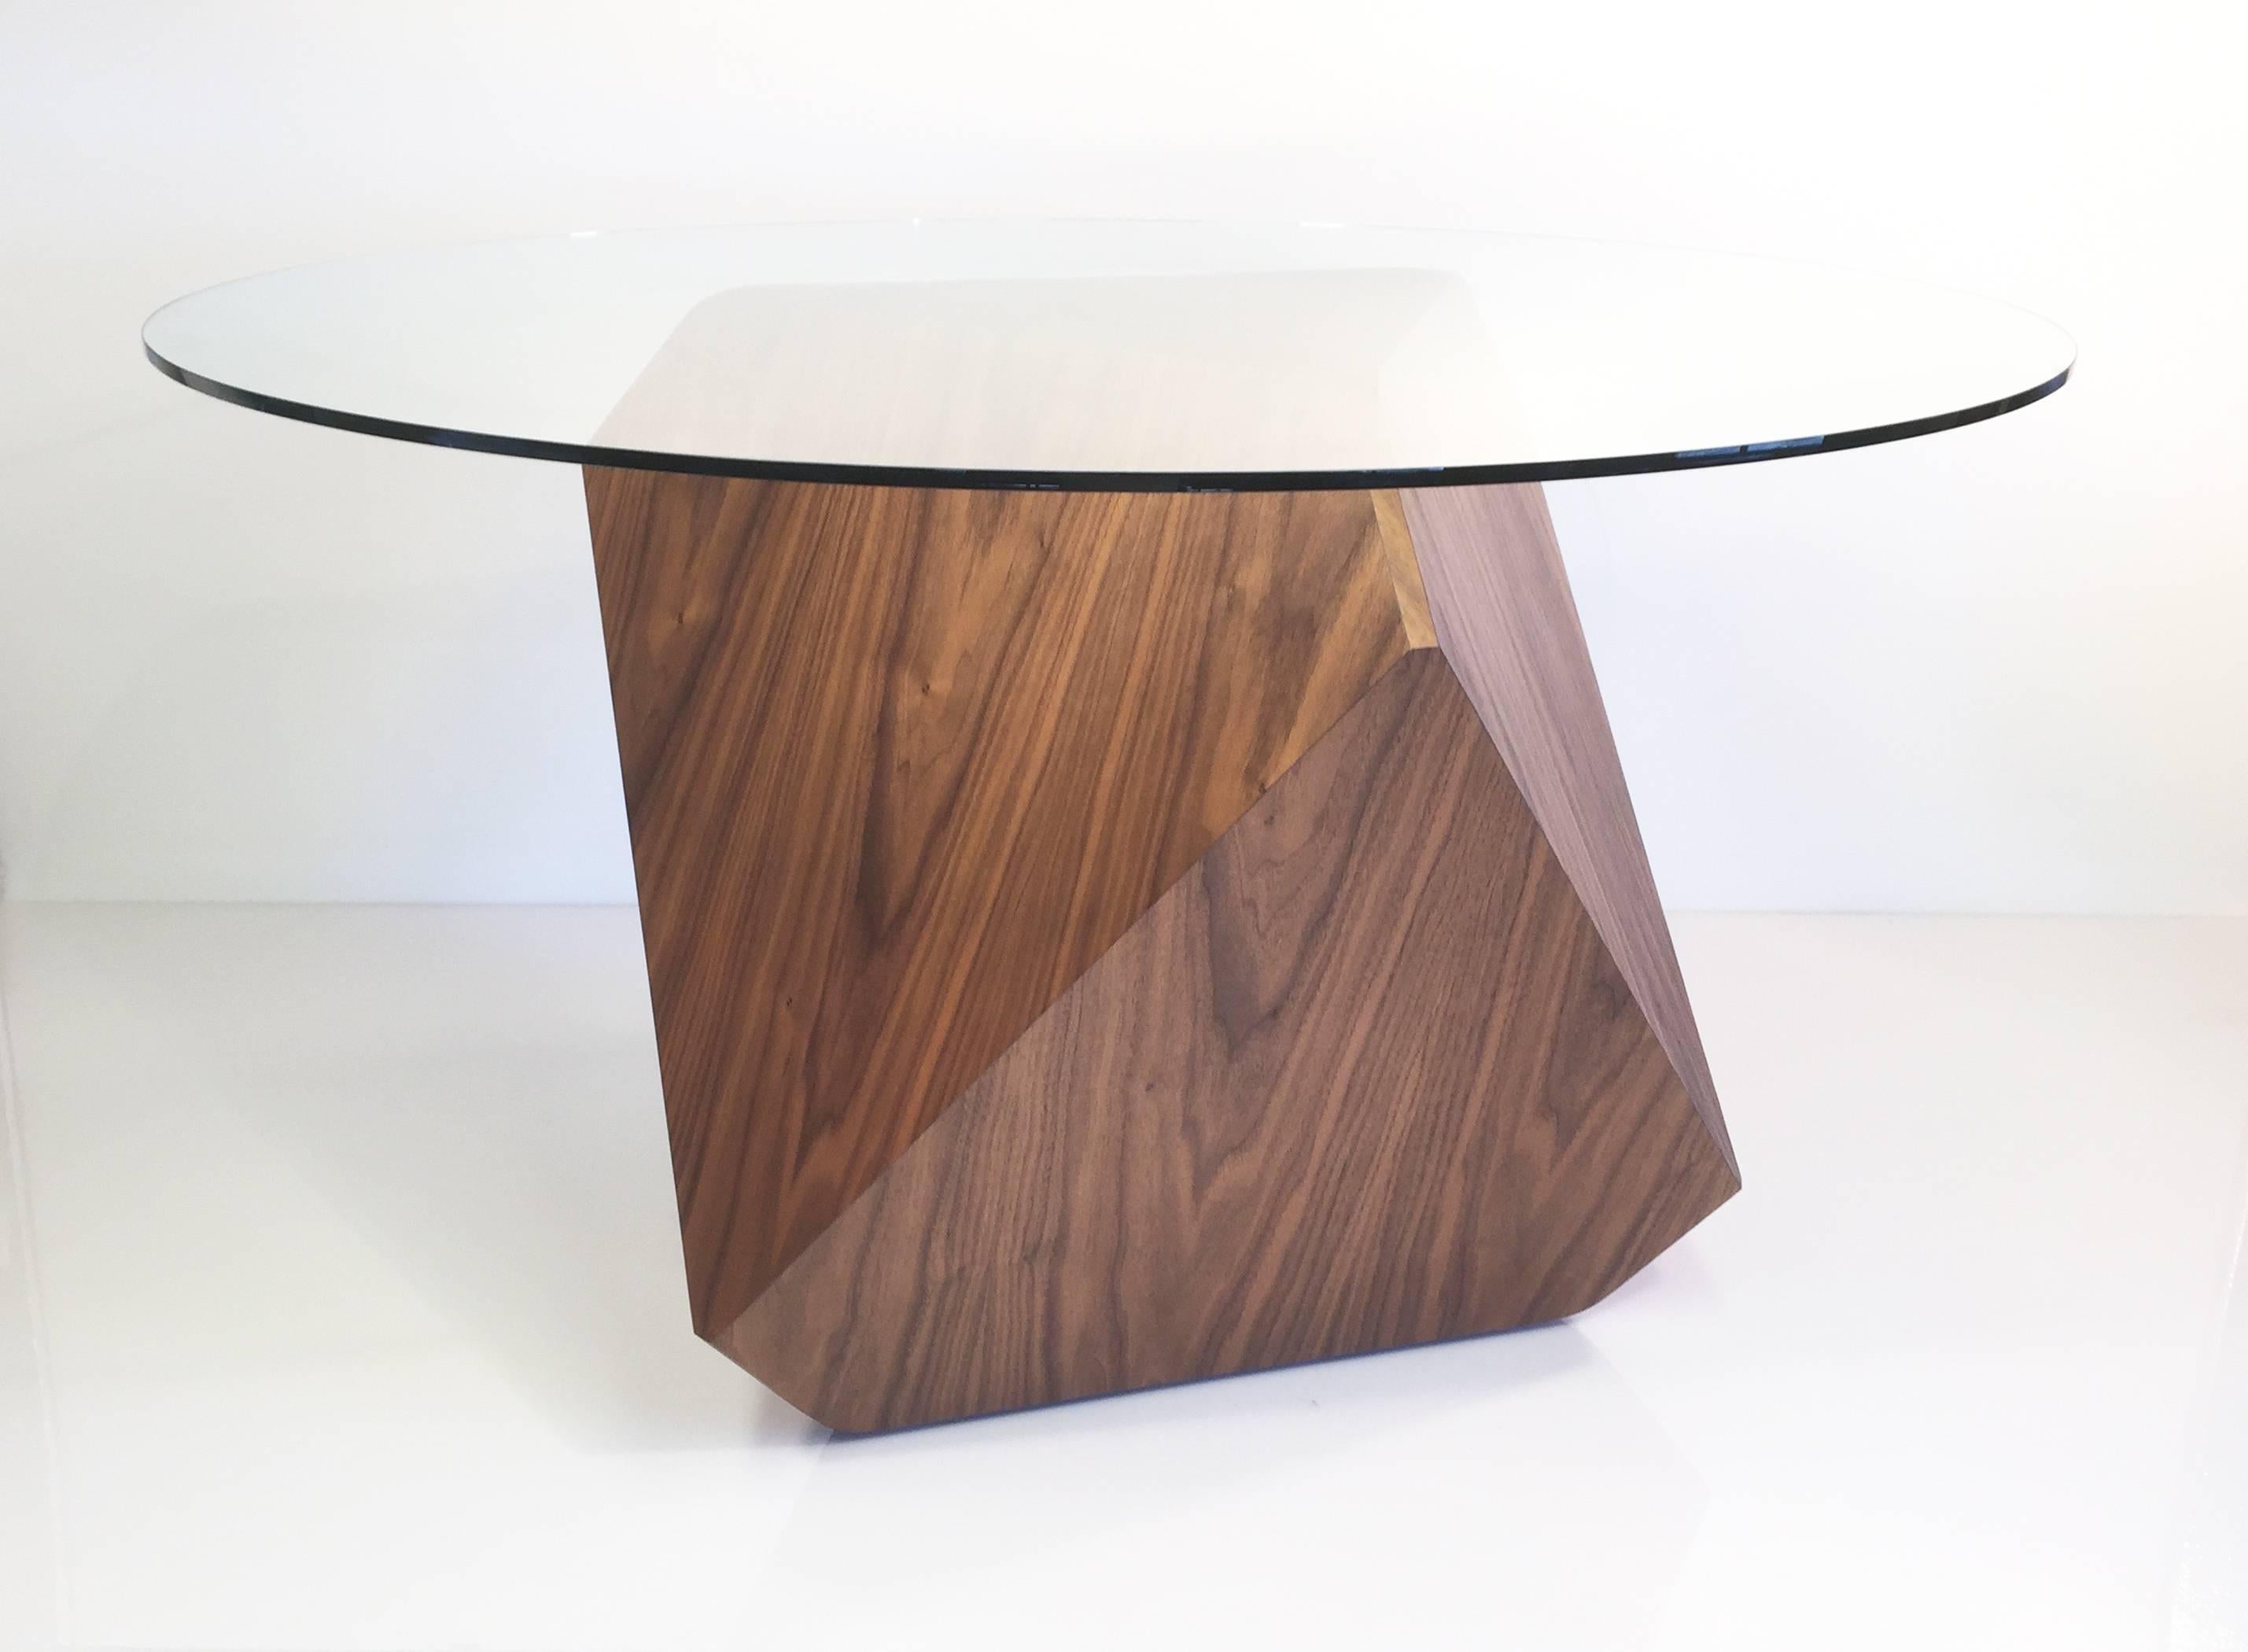 Shown in American Walnut.
Hal pedestal is offered in three standard sizes,
for 54 inch, up to 72 inch and up to 90 inch glass rounds.
William Earle works alone in his Northern California studio.
Every table is made to order and signed.
All 